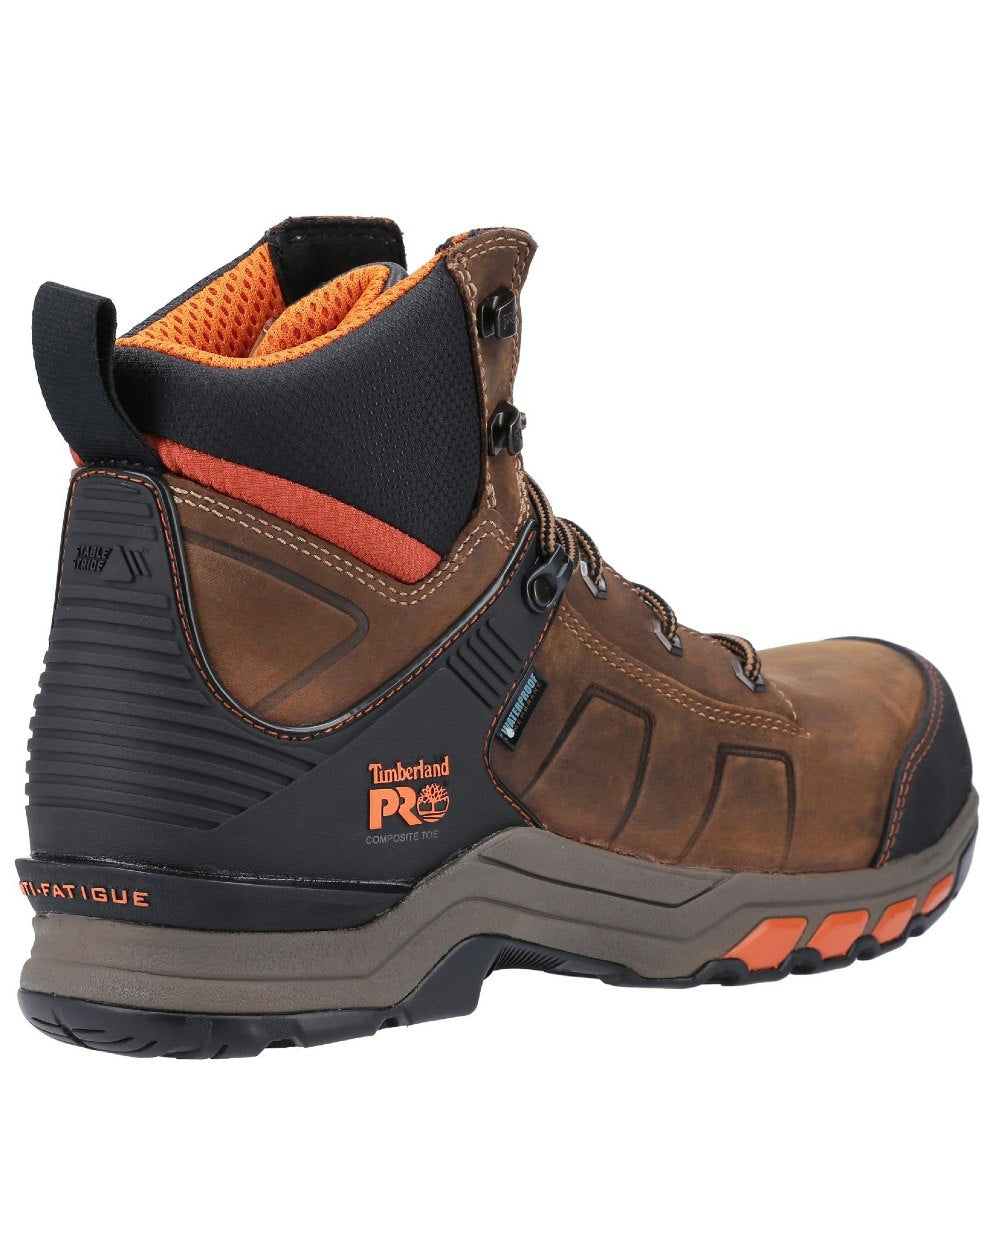 Brown/Orange Timberland Pro Hypercharge Composite Safety Toe Work Boots on white background 